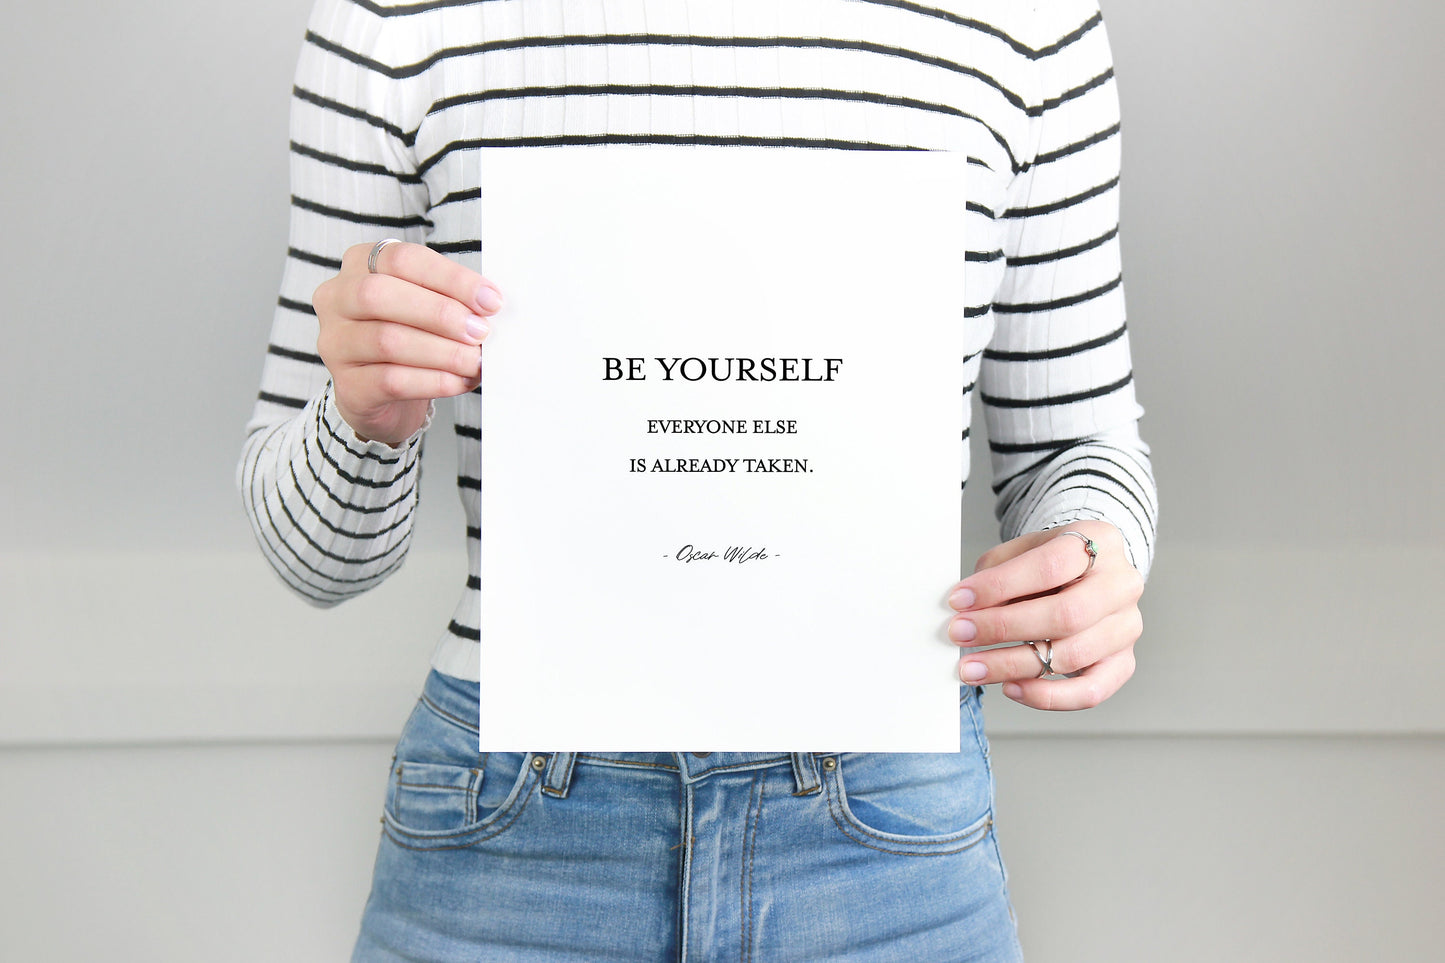 Be yourself everyone else is already taken,Oscar Wilde quote,Inspirational quote print,Classroom decor,Office decor,Motivational quote